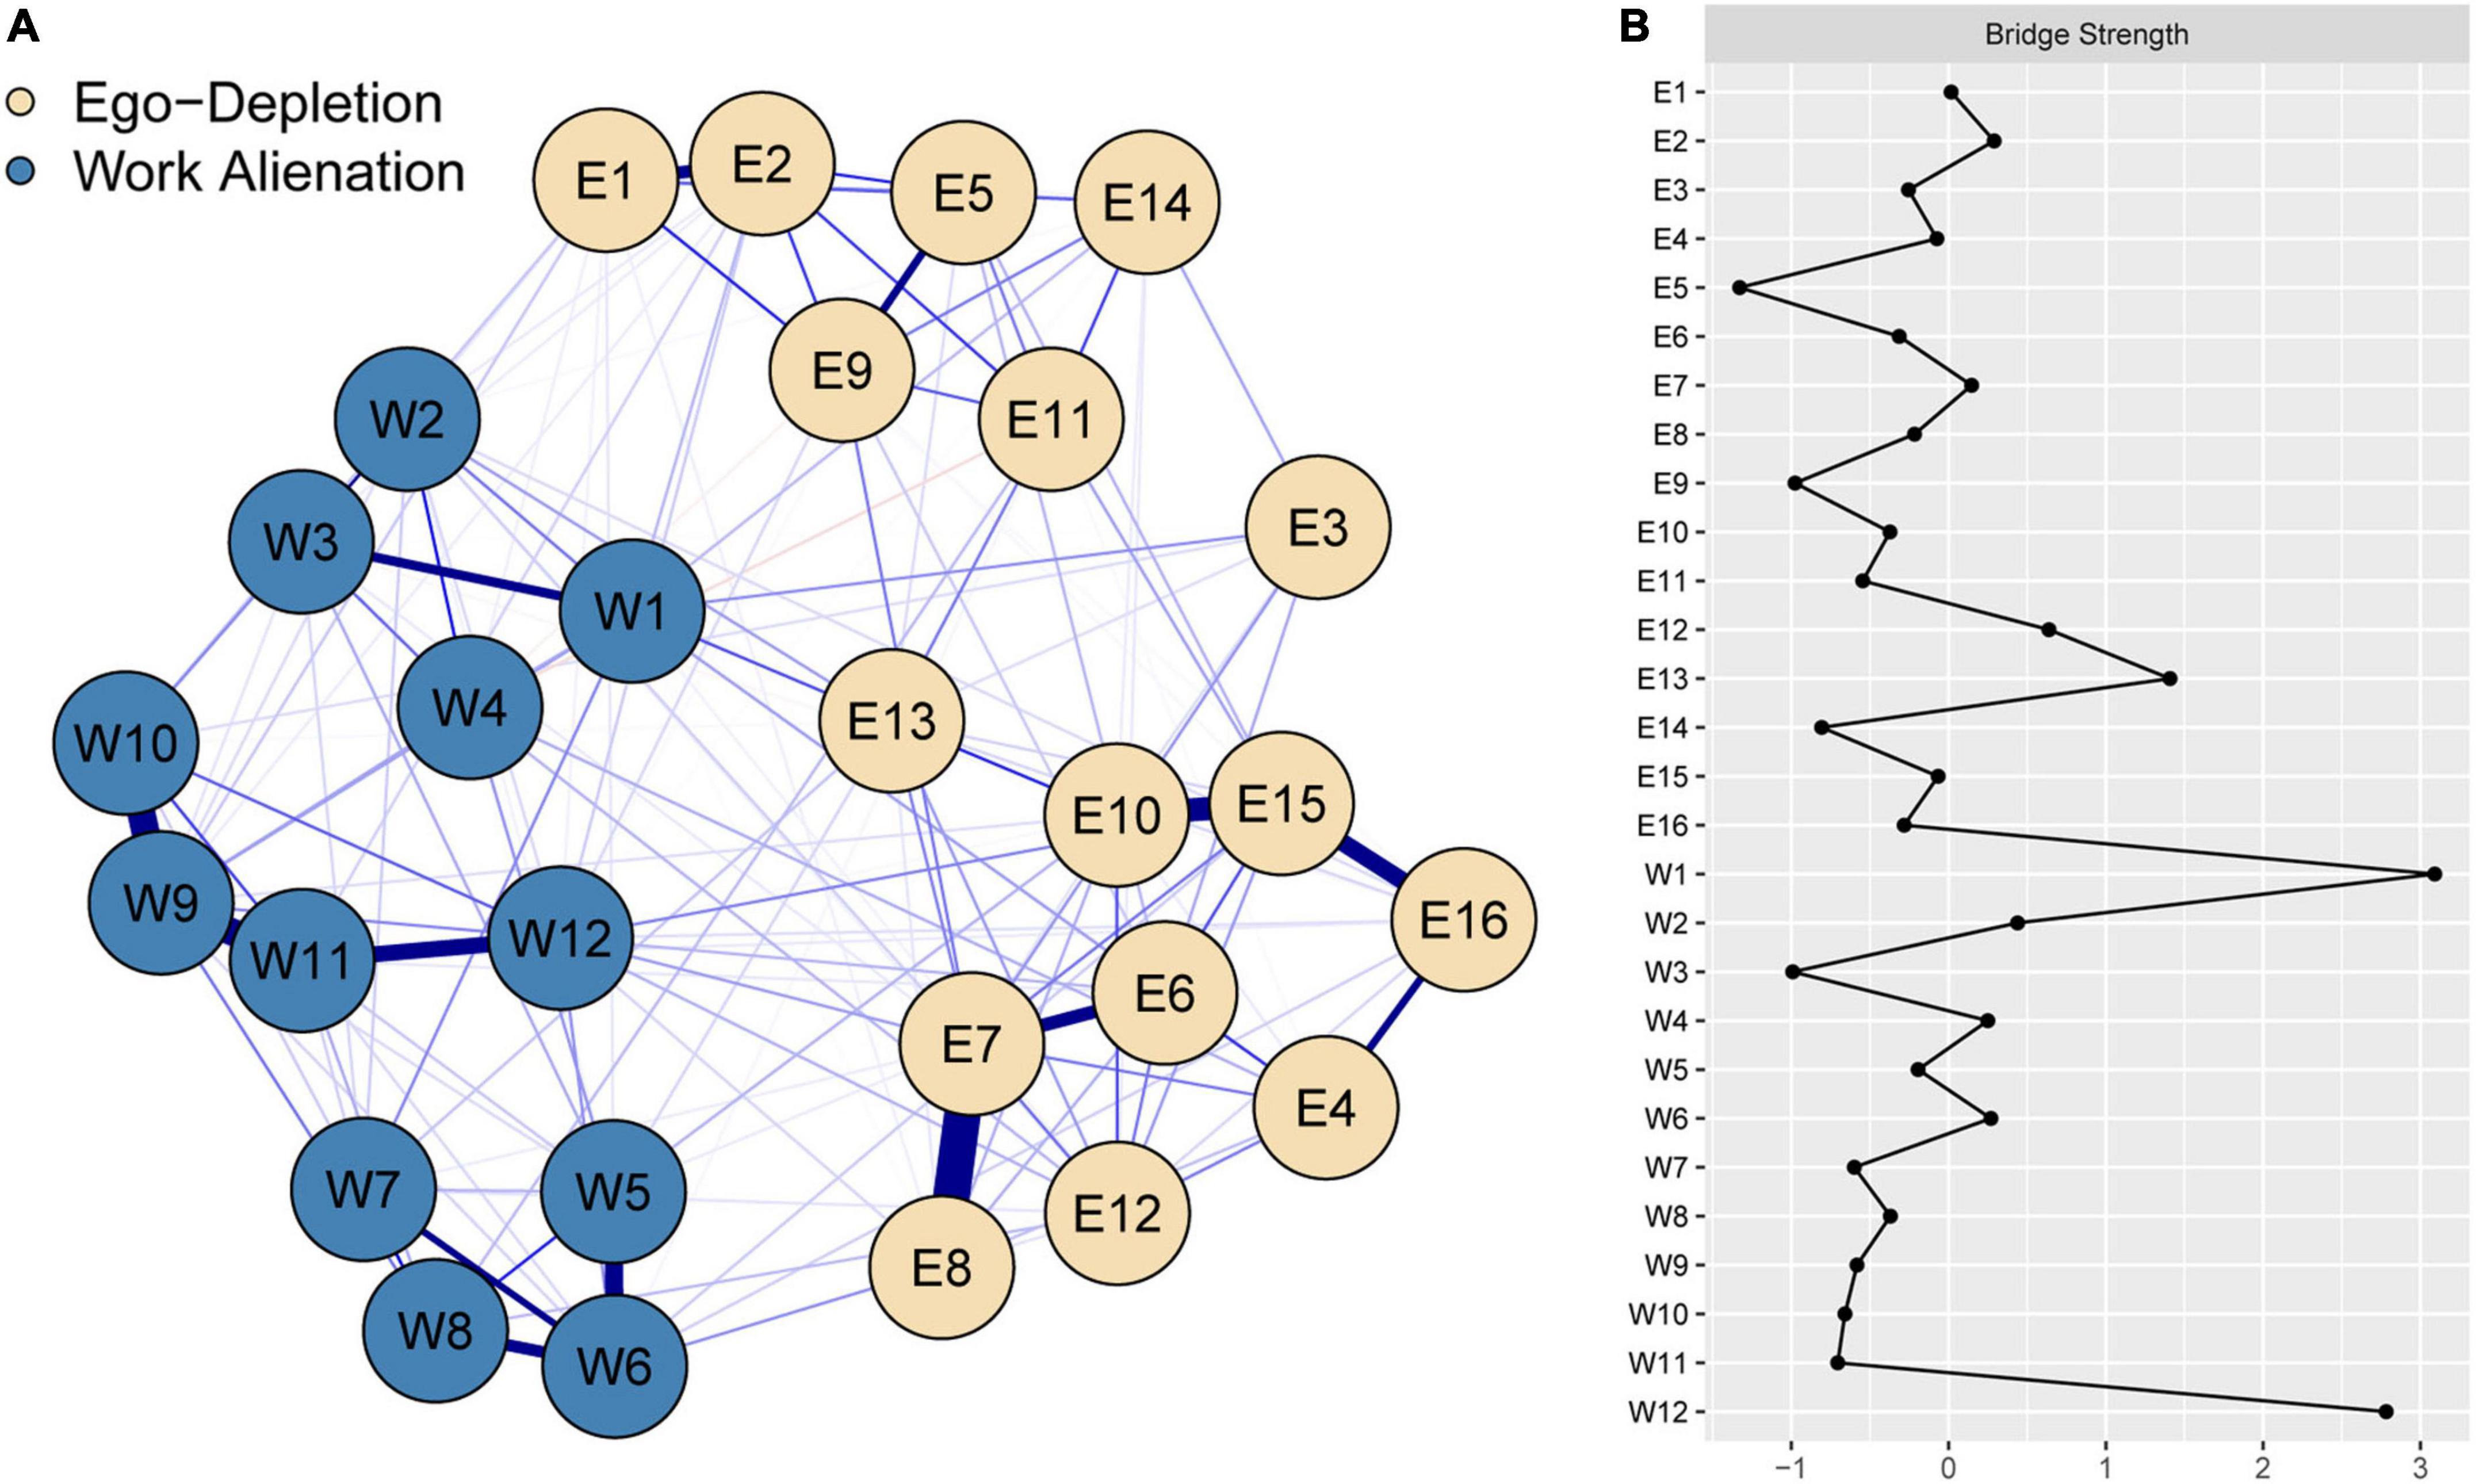 Frontiers  The relationship between ego depletion and work alienation in  Chinese nurses: A network analysis